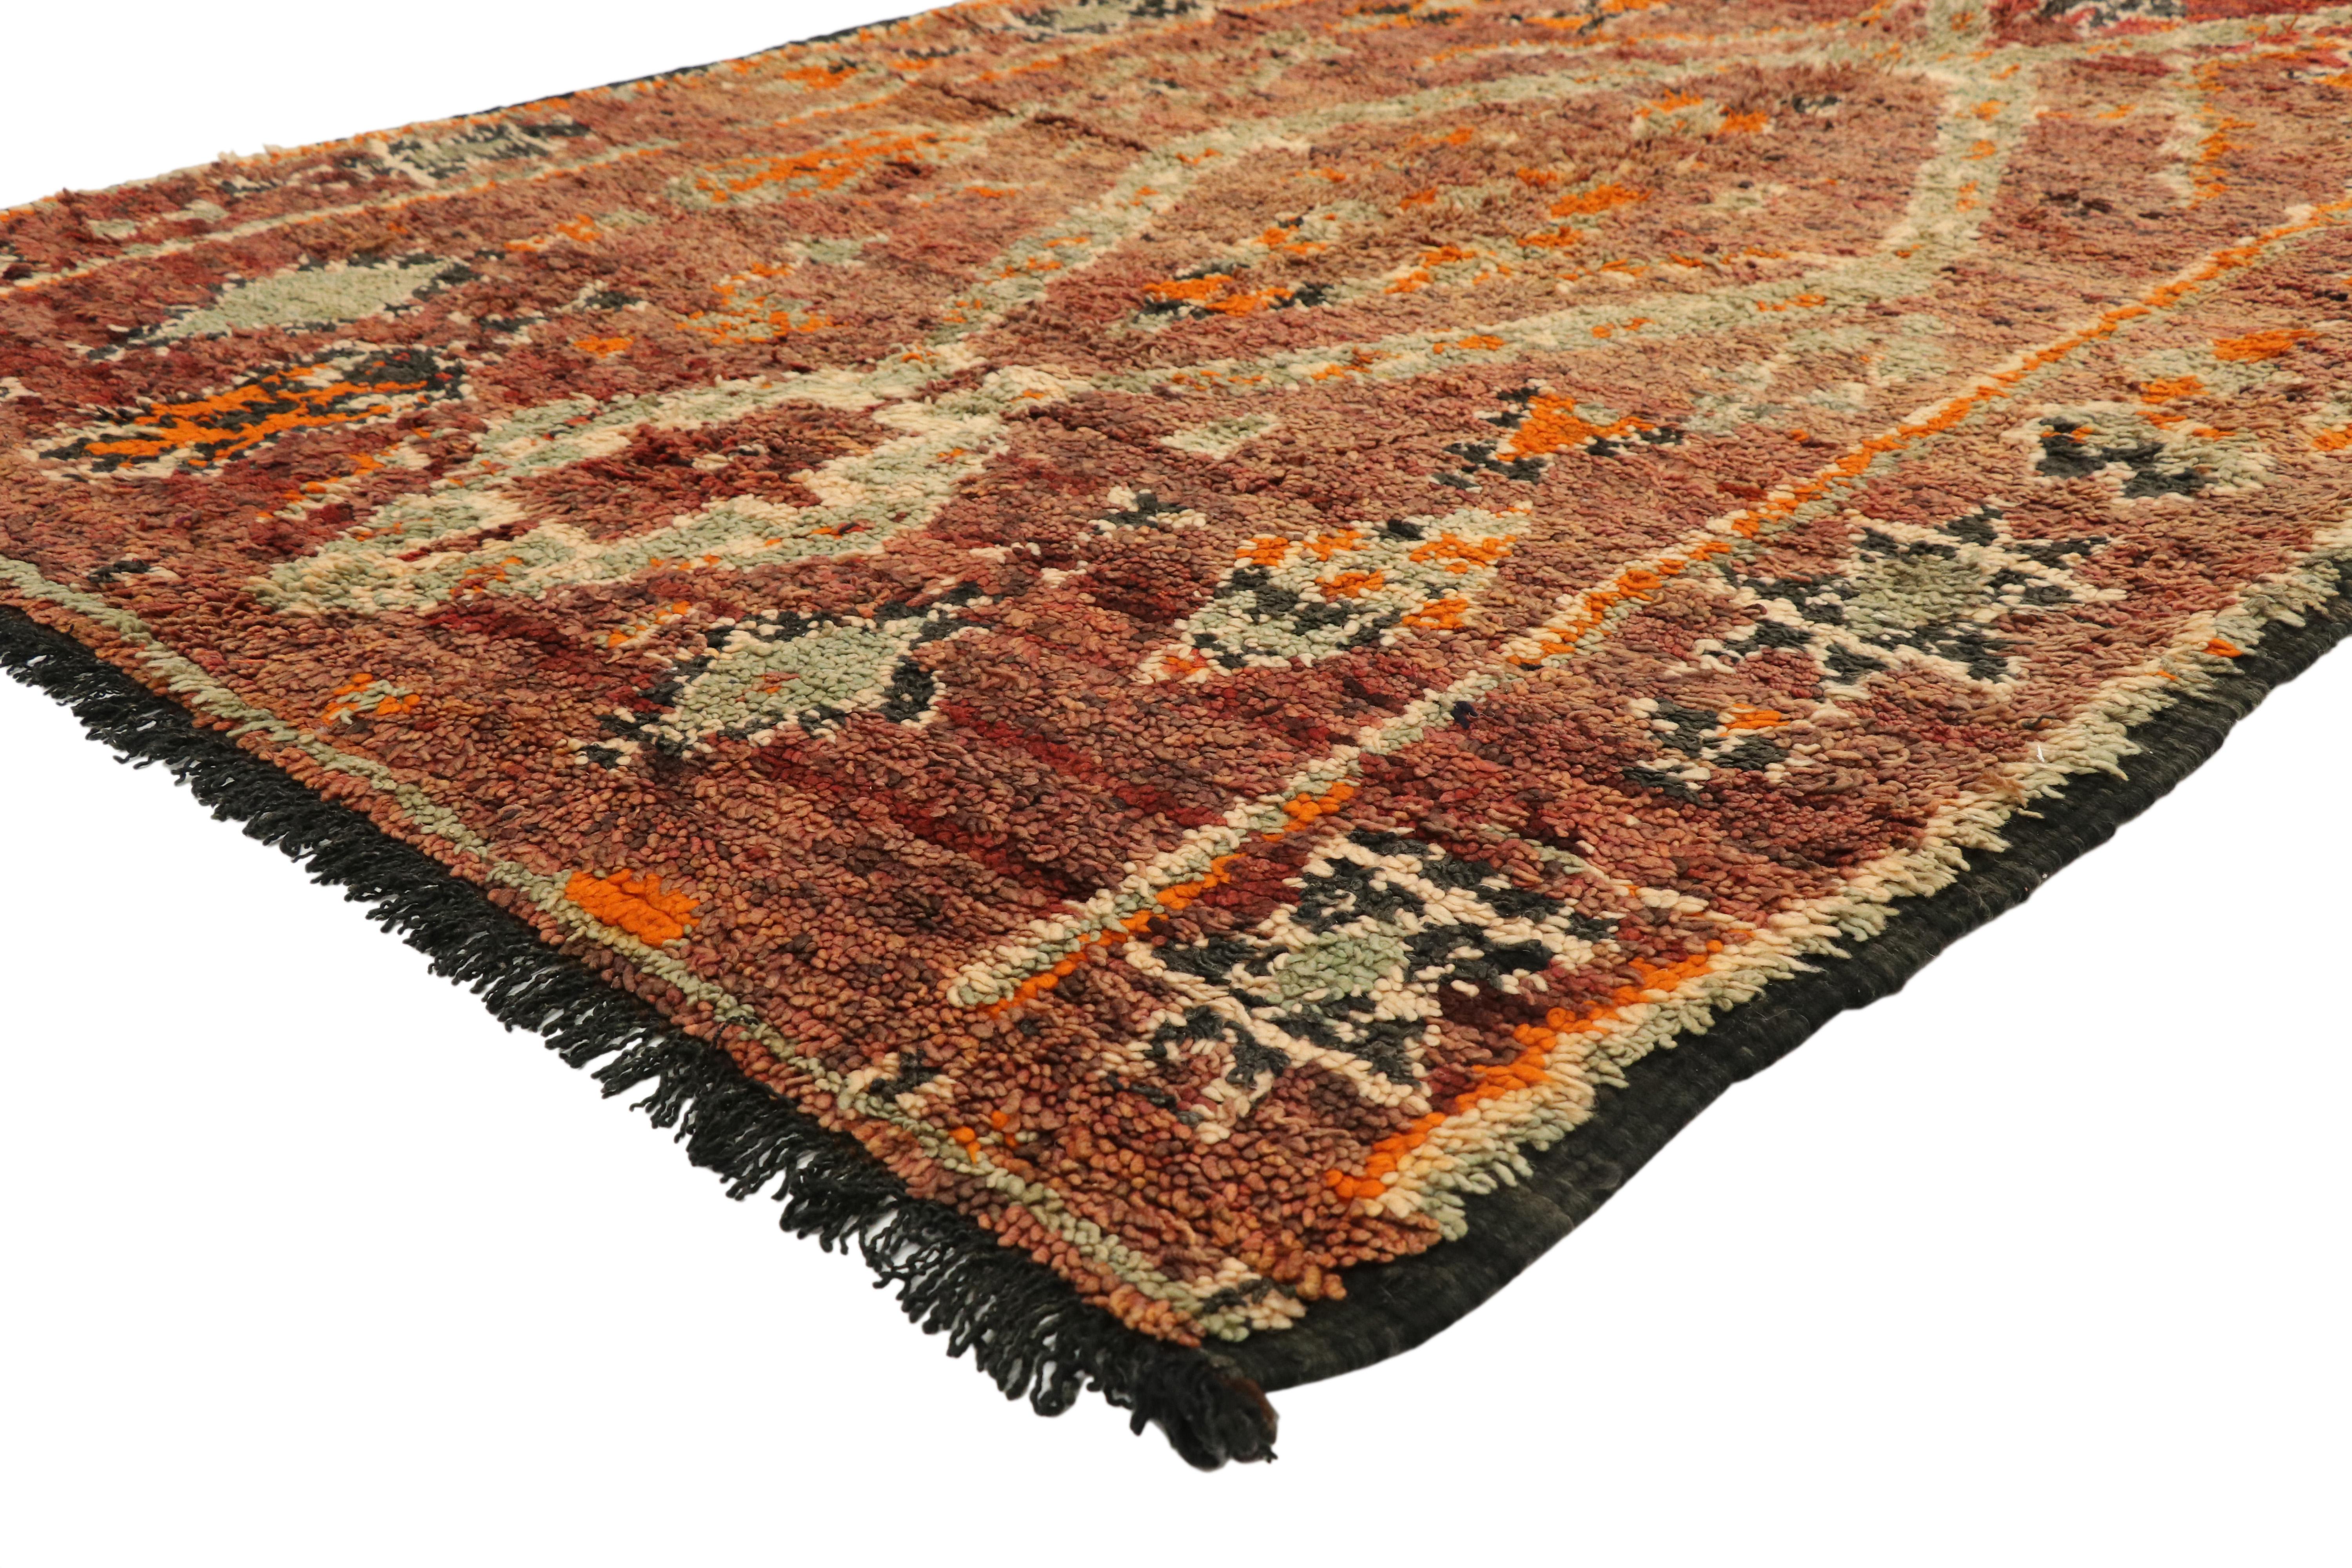 20316 Vintage Beni MGuild Moroccan Rug, 05'04 x 08'00. Beni M'Guild rugs, originating from the Beni M'Guild tribe nestled in the Middle Atlas Mountains of Morocco, embody a cherished tradition deeply woven into Berber culture. Handcrafted by skilled